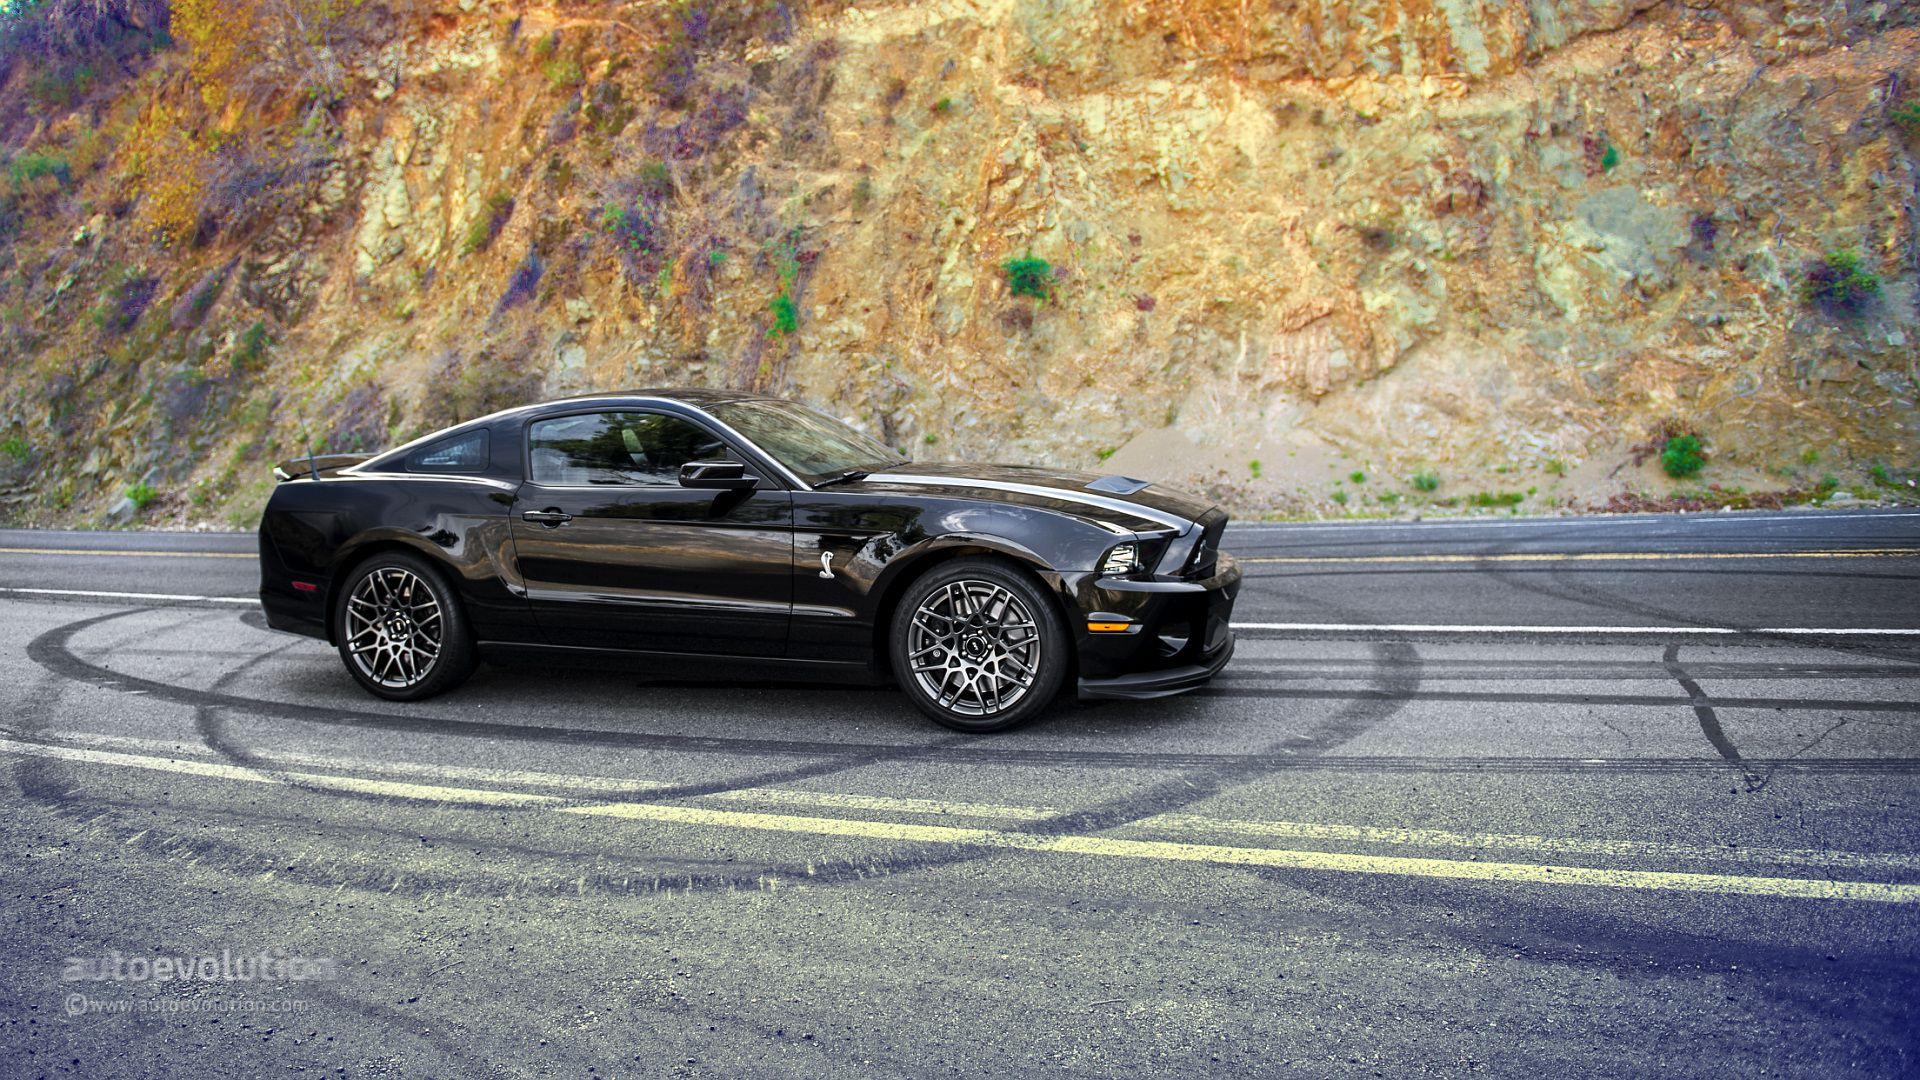 Ford Mustang Shelby GT500 HD Wallpaper